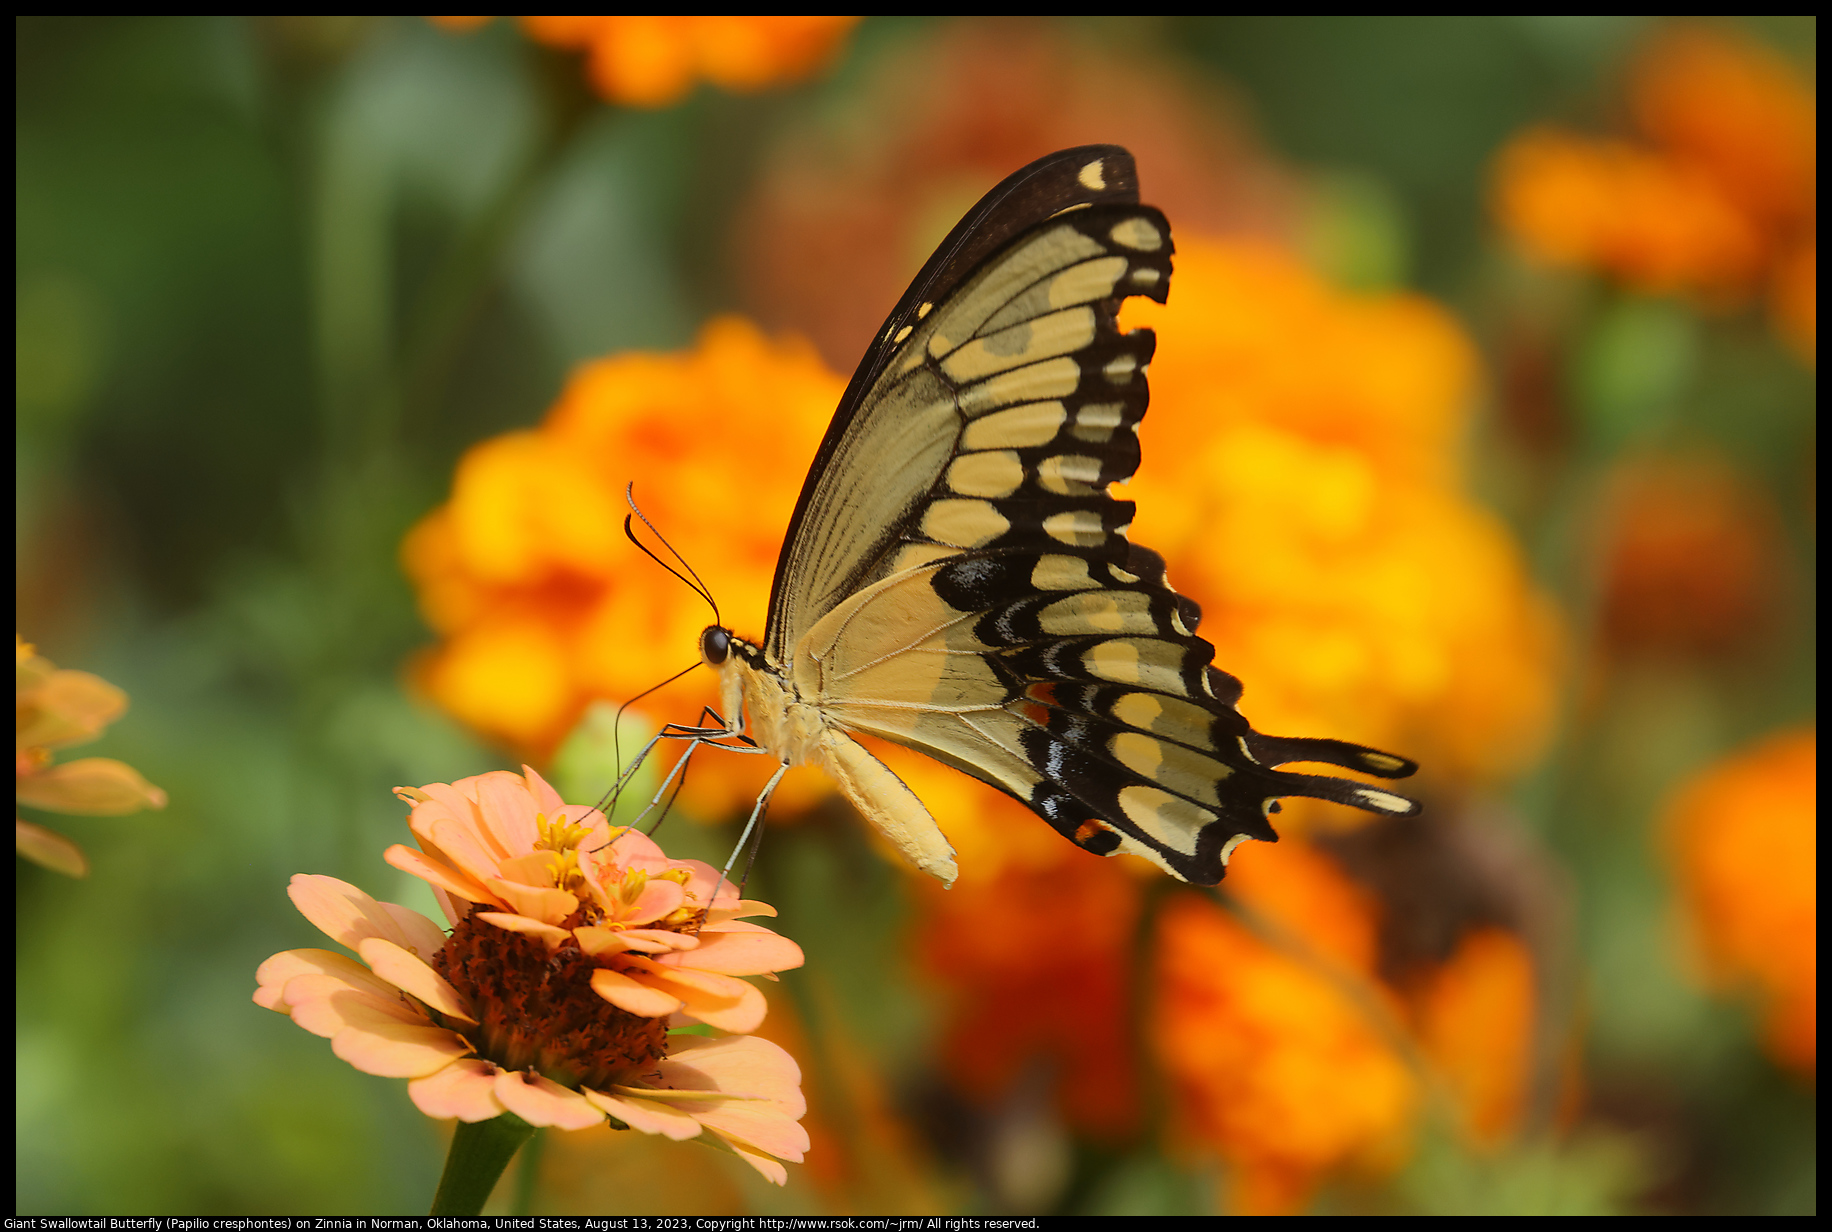 Giant Swallowtail Butterfly (Papilio cresphontes) on Zinnia in Norman, Oklahoma, United States on August 13, 2023